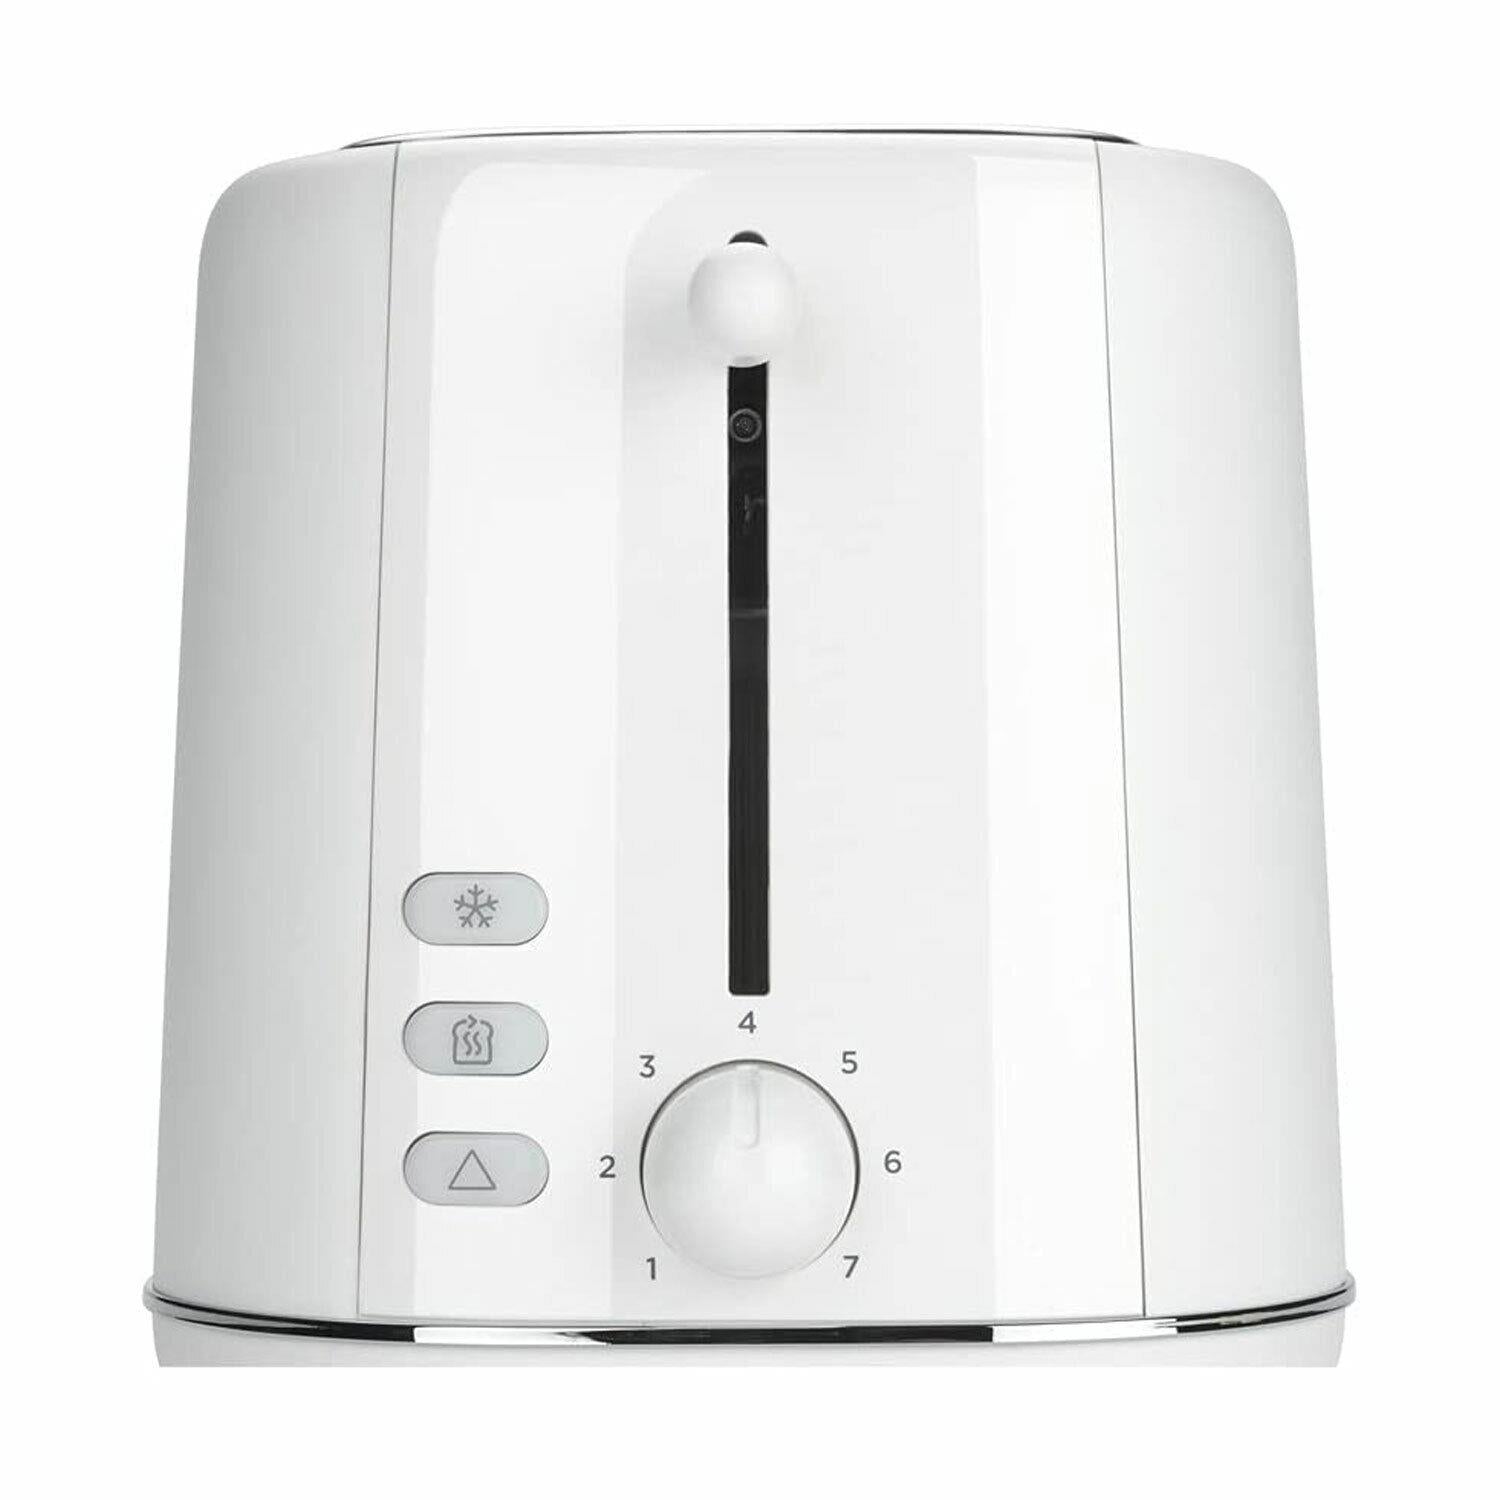 Kenwood 2 Slice Toaster 7 Browning Settings Abbey Lux 800w TCP05.A0WH - White